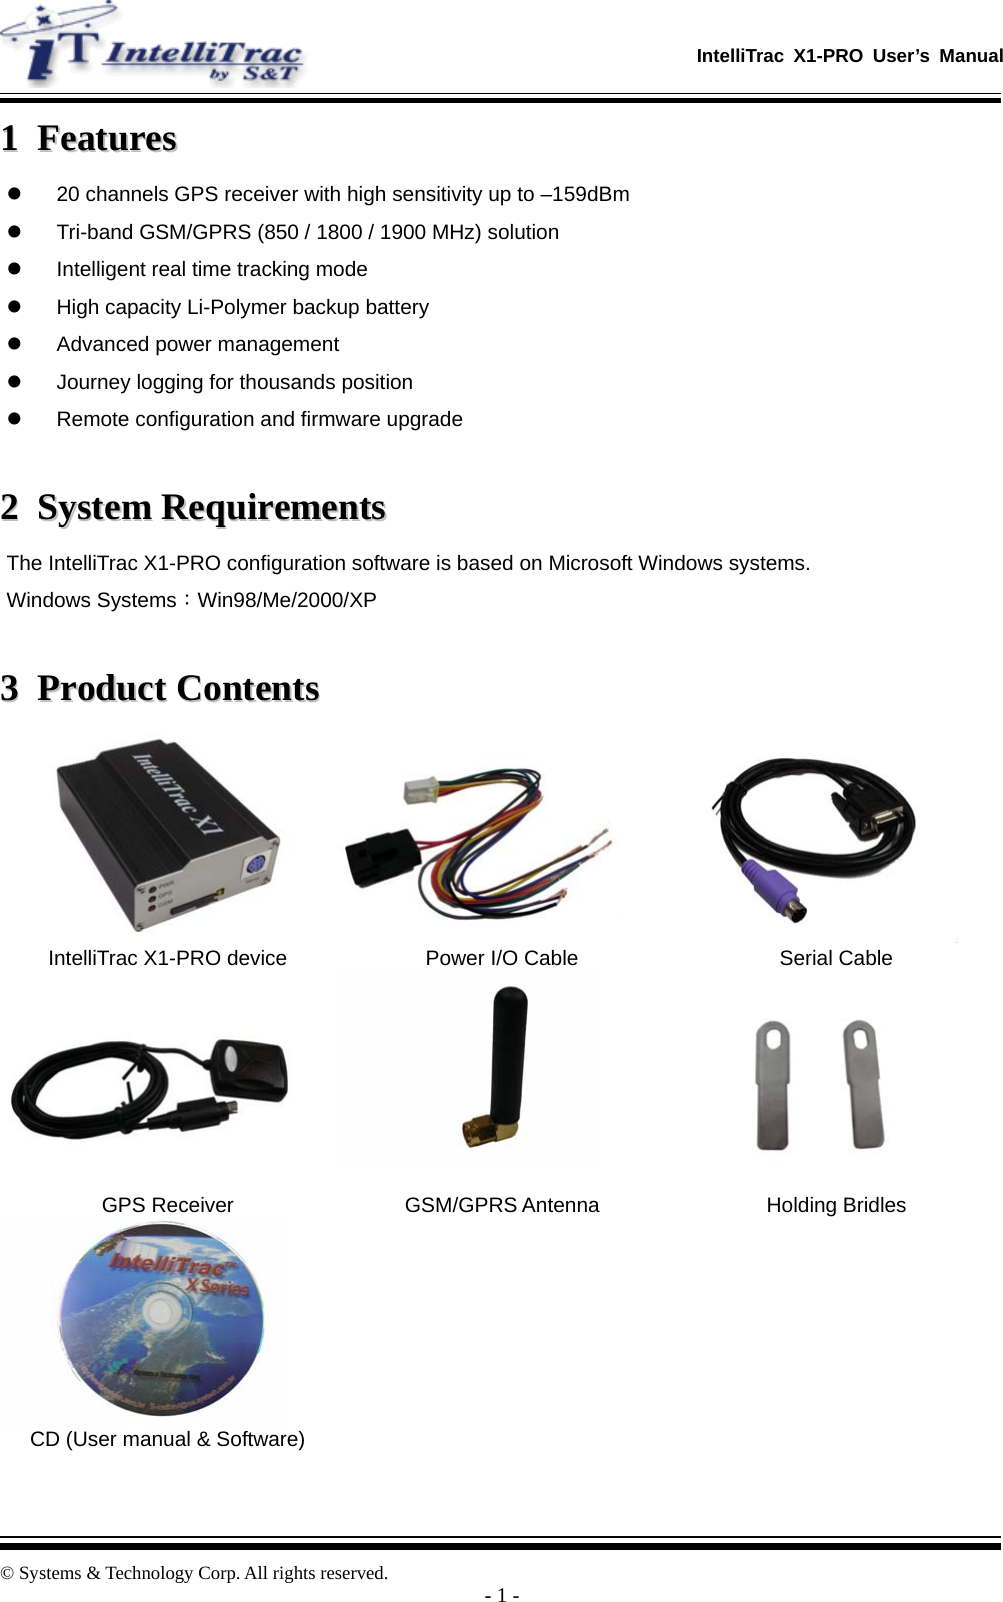  IntelliTrac X1-PRO User’s Manual   © Systems &amp; Technology Corp. All rights reserved.  - 1 - 11  FFeeaattuurreess  z  20 channels GPS receiver with high sensitivity up to –159dBm z  Tri-band GSM/GPRS (850 / 1800 / 1900 MHz) solution z  Intelligent real time tracking mode z  High capacity Li-Polymer backup battery z  Advanced power management z  Journey logging for thousands position z  Remote configuration and firmware upgrade  22  SSyysstteemm  RReeqquuiirreemmeennttss  The IntelliTrac X1-PRO configuration software is based on Microsoft Windows systems. Windows Systems：Win98/Me/2000/XP  33  PPrroodduucctt  CCoonntteennttss     IntelliTrac X1-PRO device  Power I/O Cable  Serial Cable    GPS Receiver  GSM/GPRS Antenna  Holding Bridles    CD (User manual &amp; Software)       